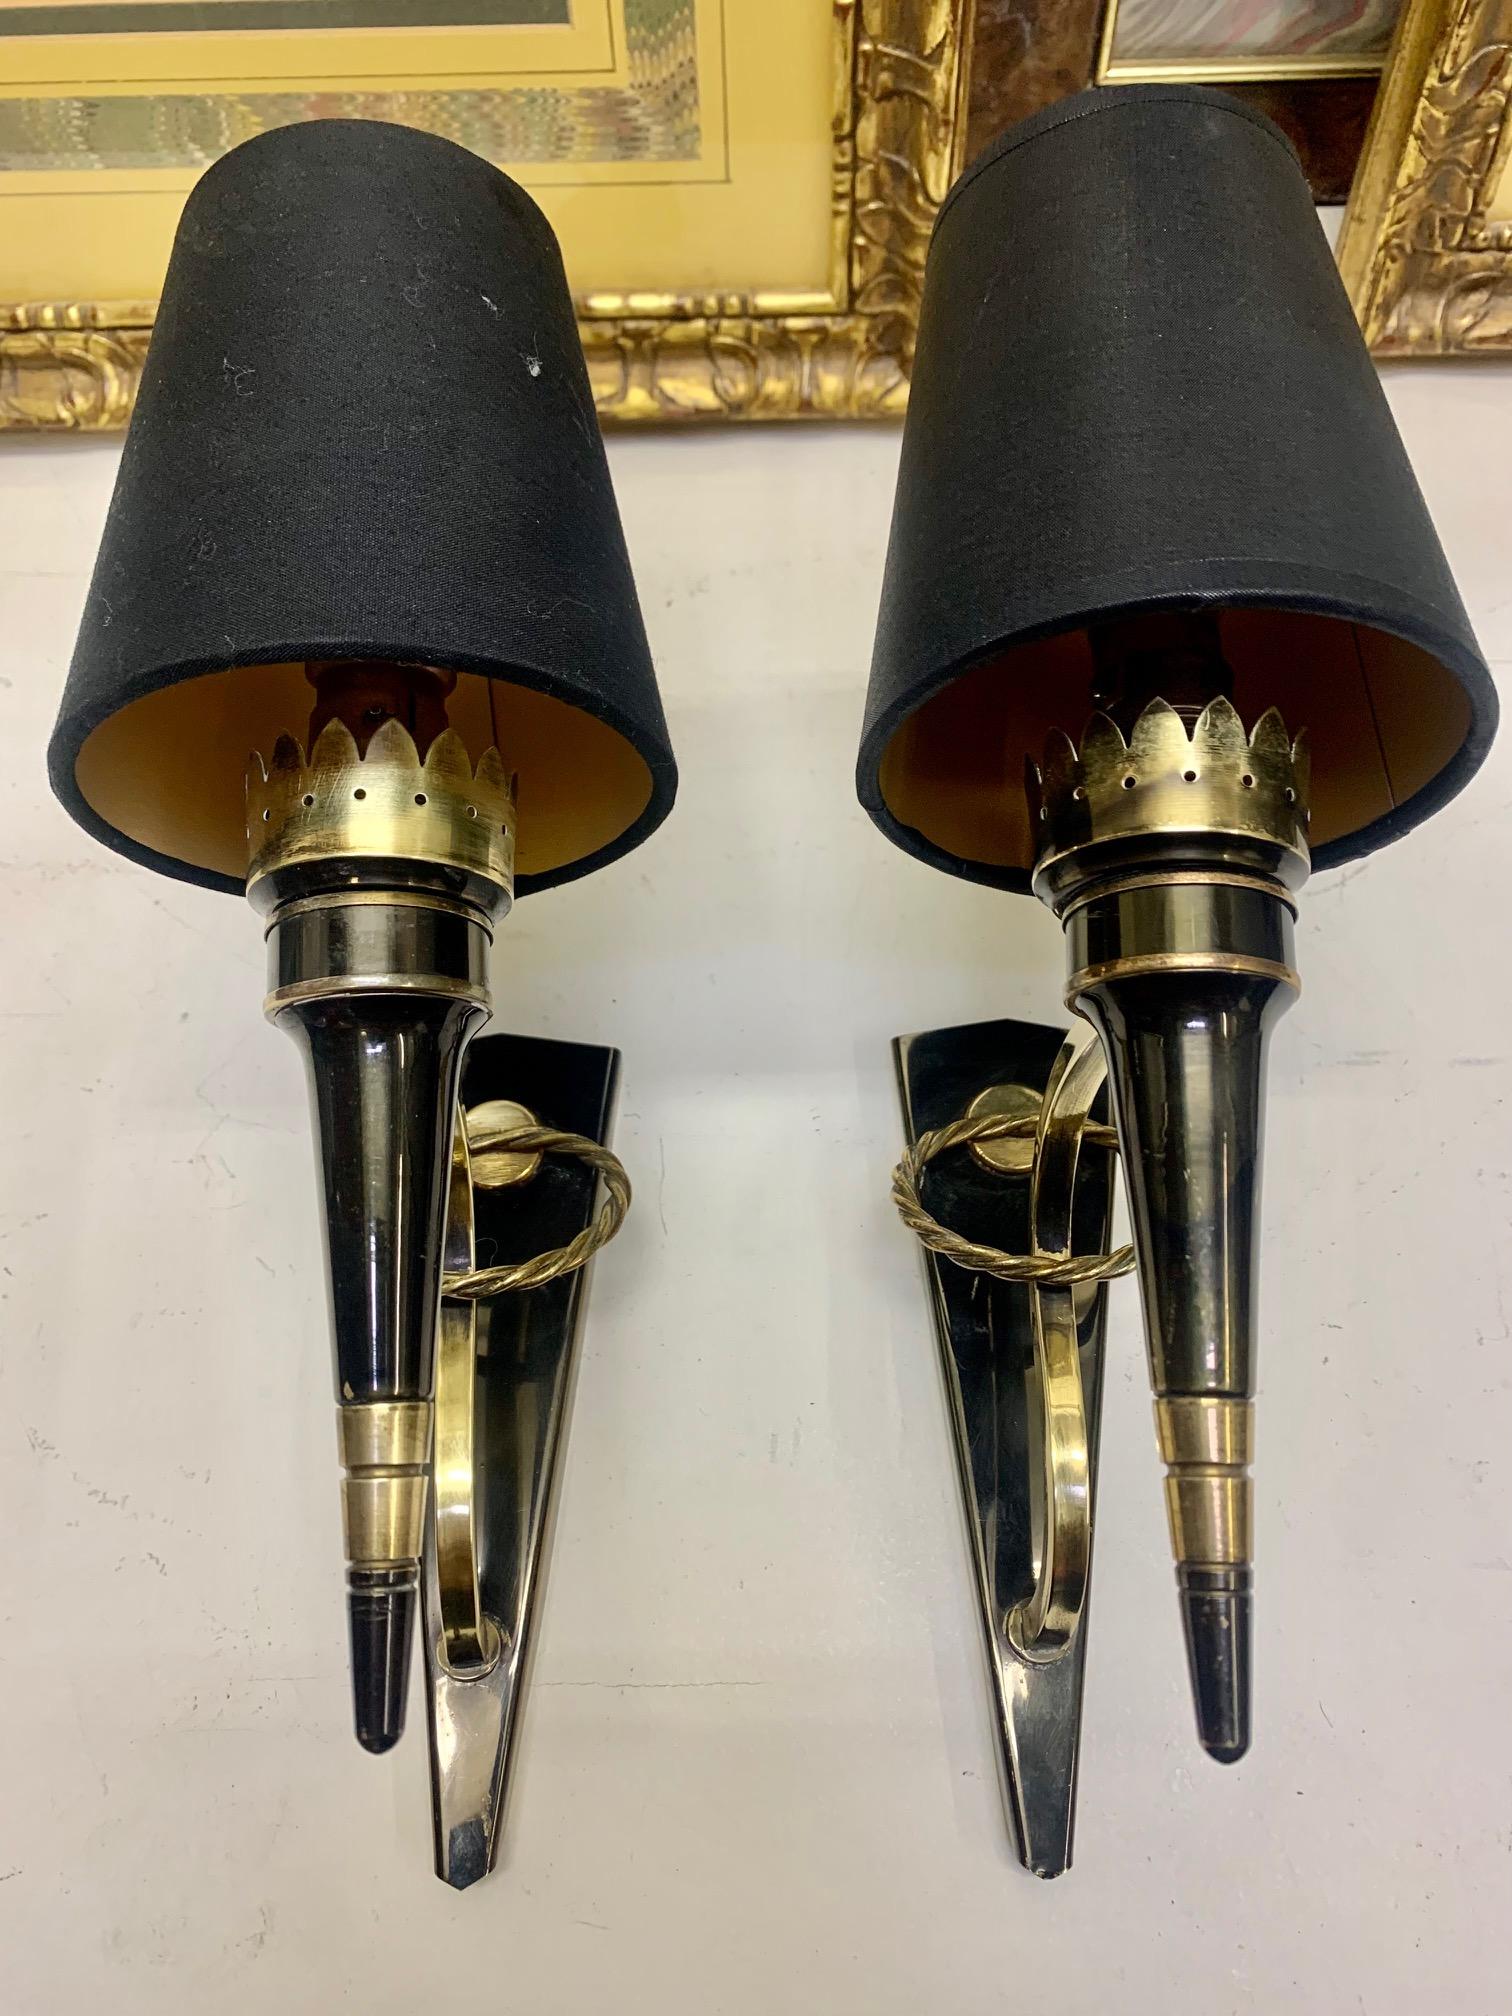 French mid-century pair of wall sconces by Arlus, Brass and netal laquered, with decoration of a brass circle, the lampshades are black with the interior in gold. They are in very good condition and ready for operation in the USA.